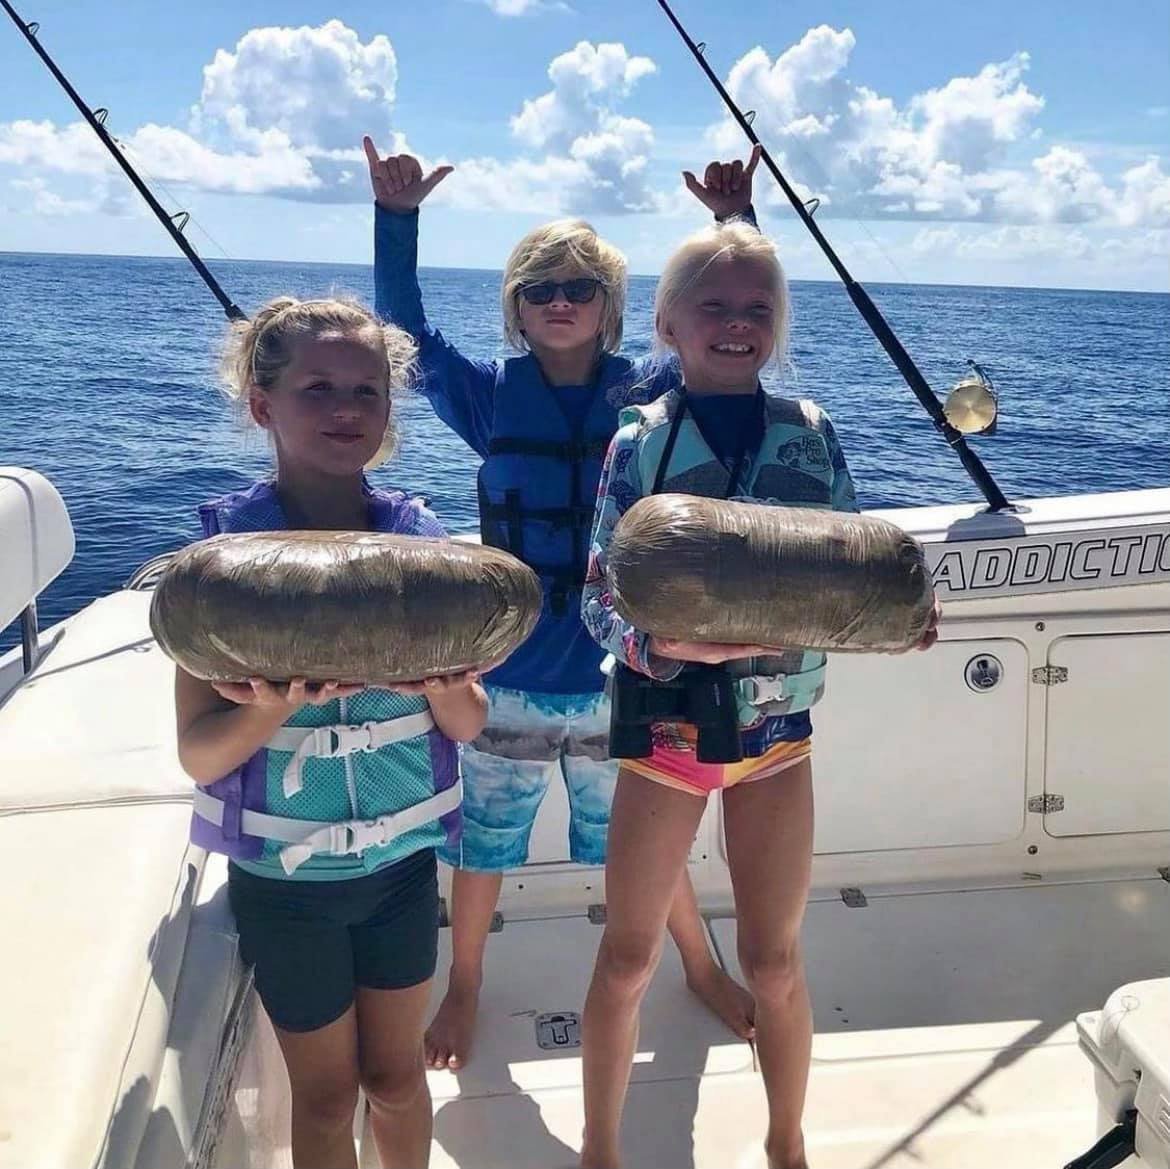 Jim McIlvaine on X: When you take your kids fishing in Florida